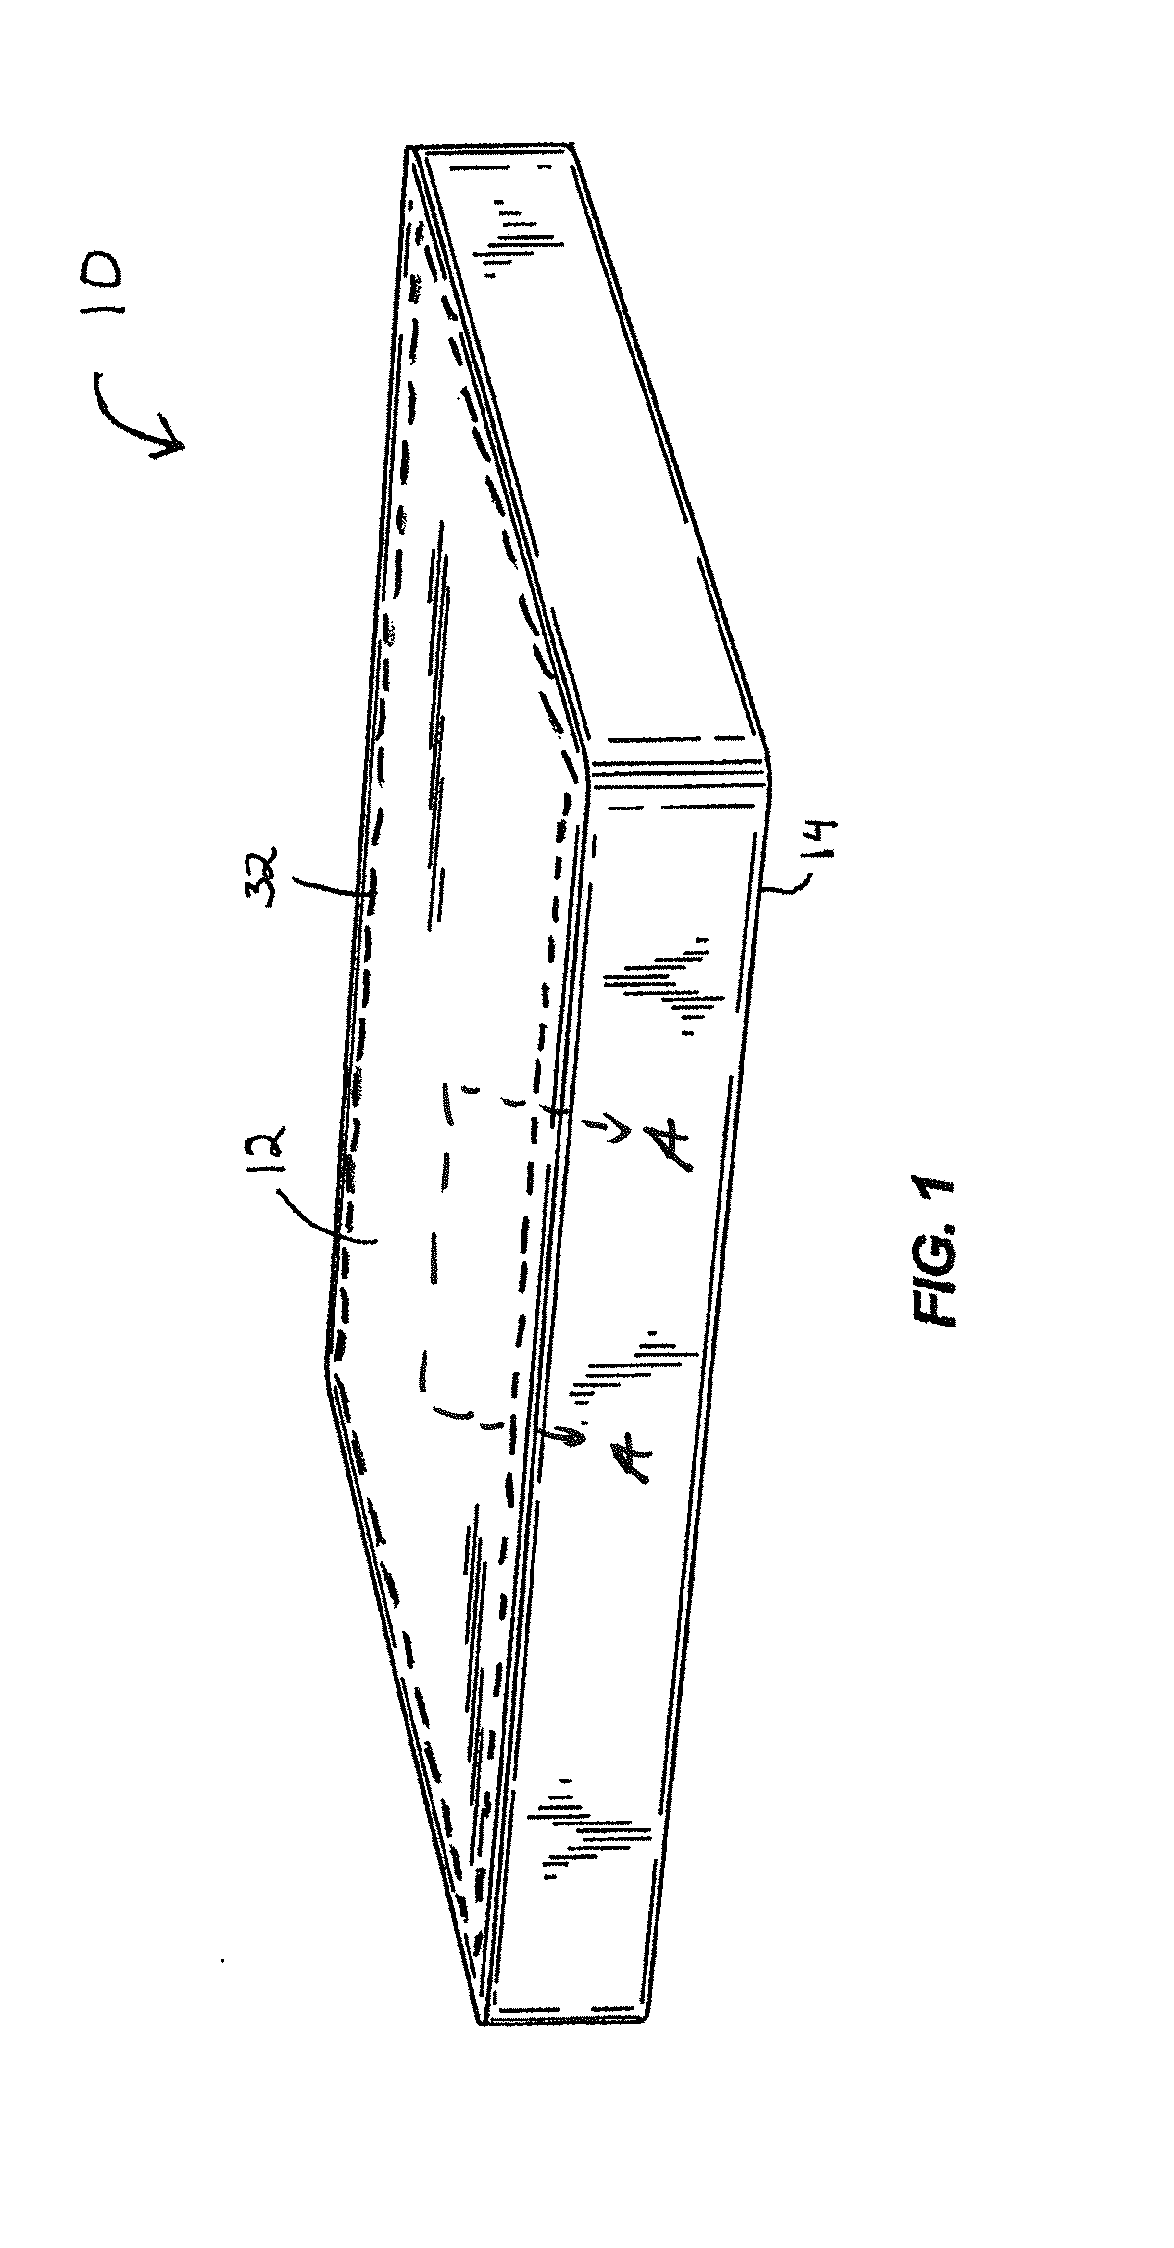 Body support modified with viscous gel and method of manufacturing a body support using the same